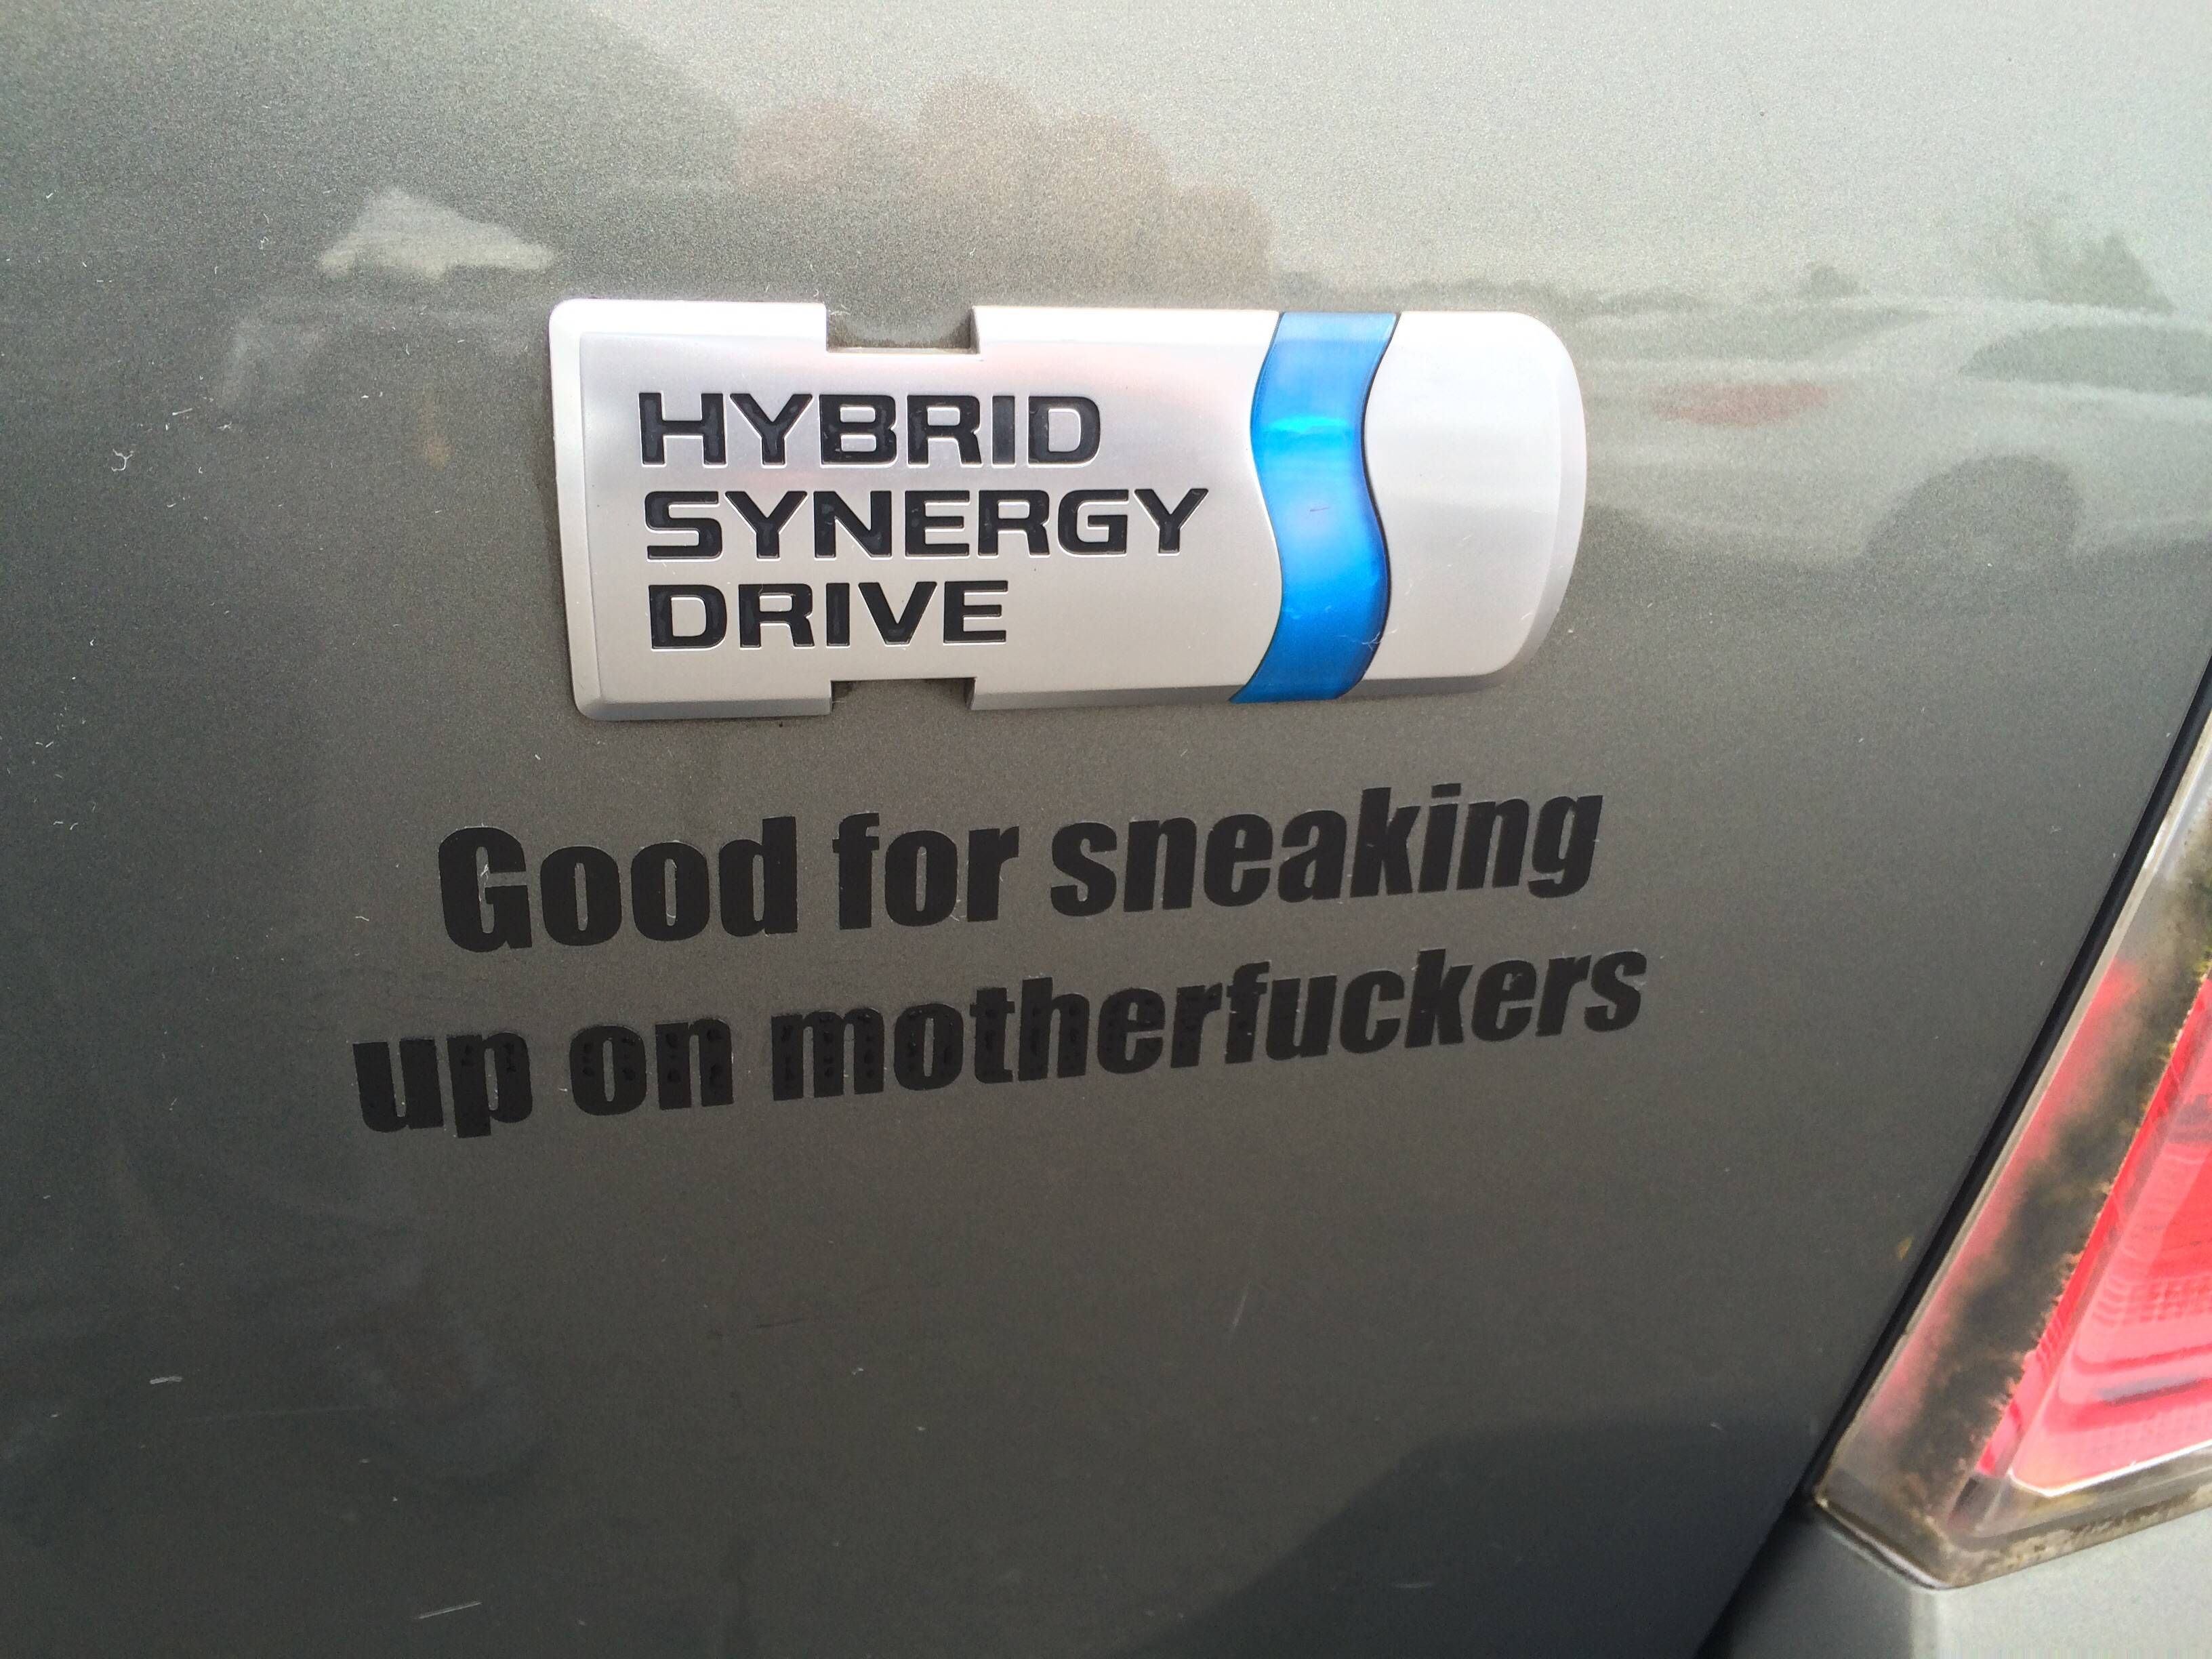 hybrid decal - Hybrid Synergy Drive Good for sneaking up on motherfuckers